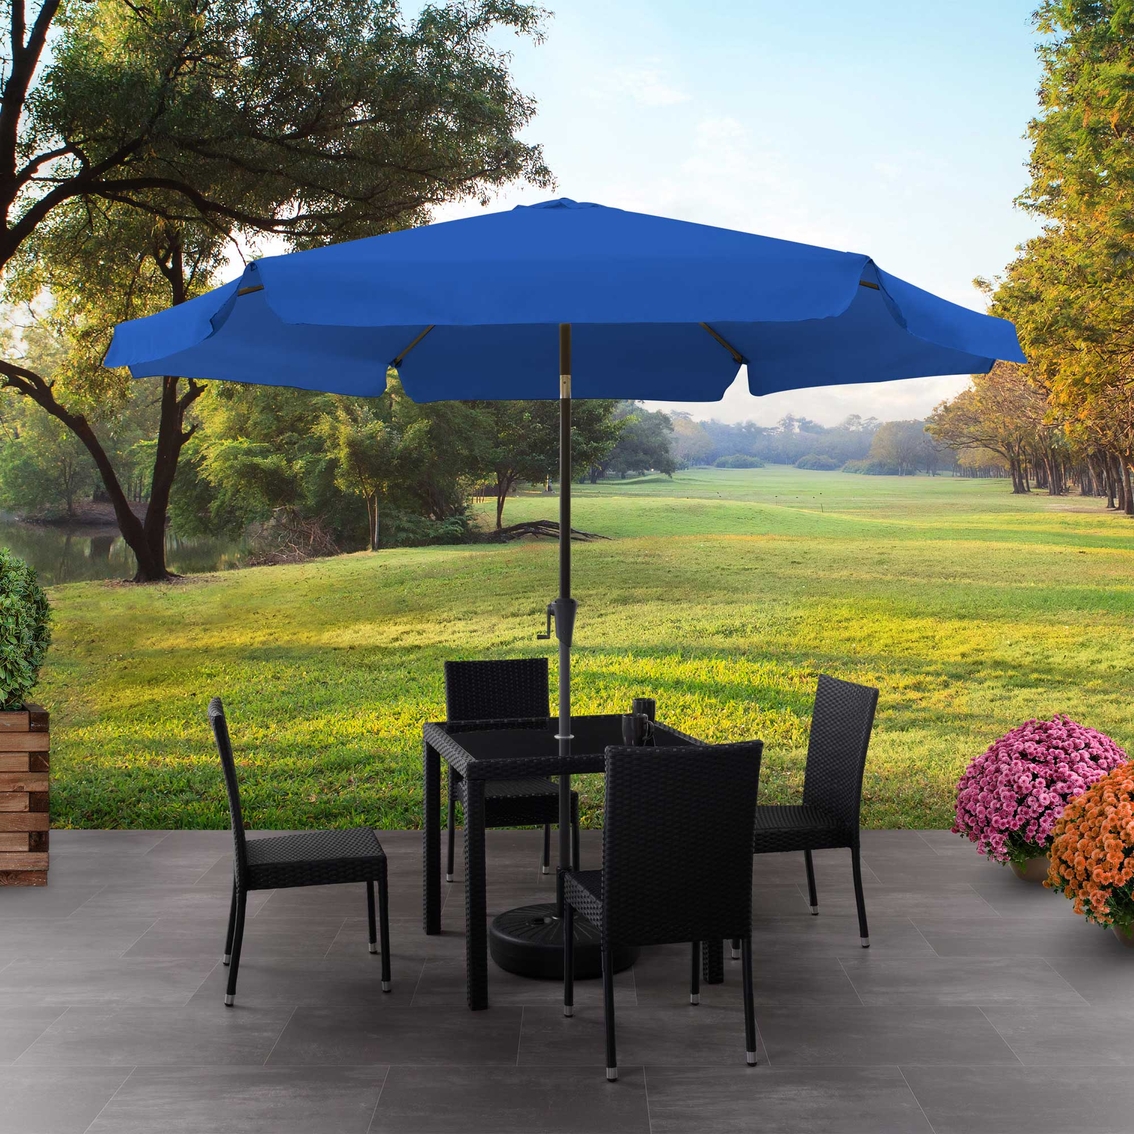 CorLiving PPU-201-Z1 10 ft. Round Tilting Patio Umbrella and Base - Image 5 of 5